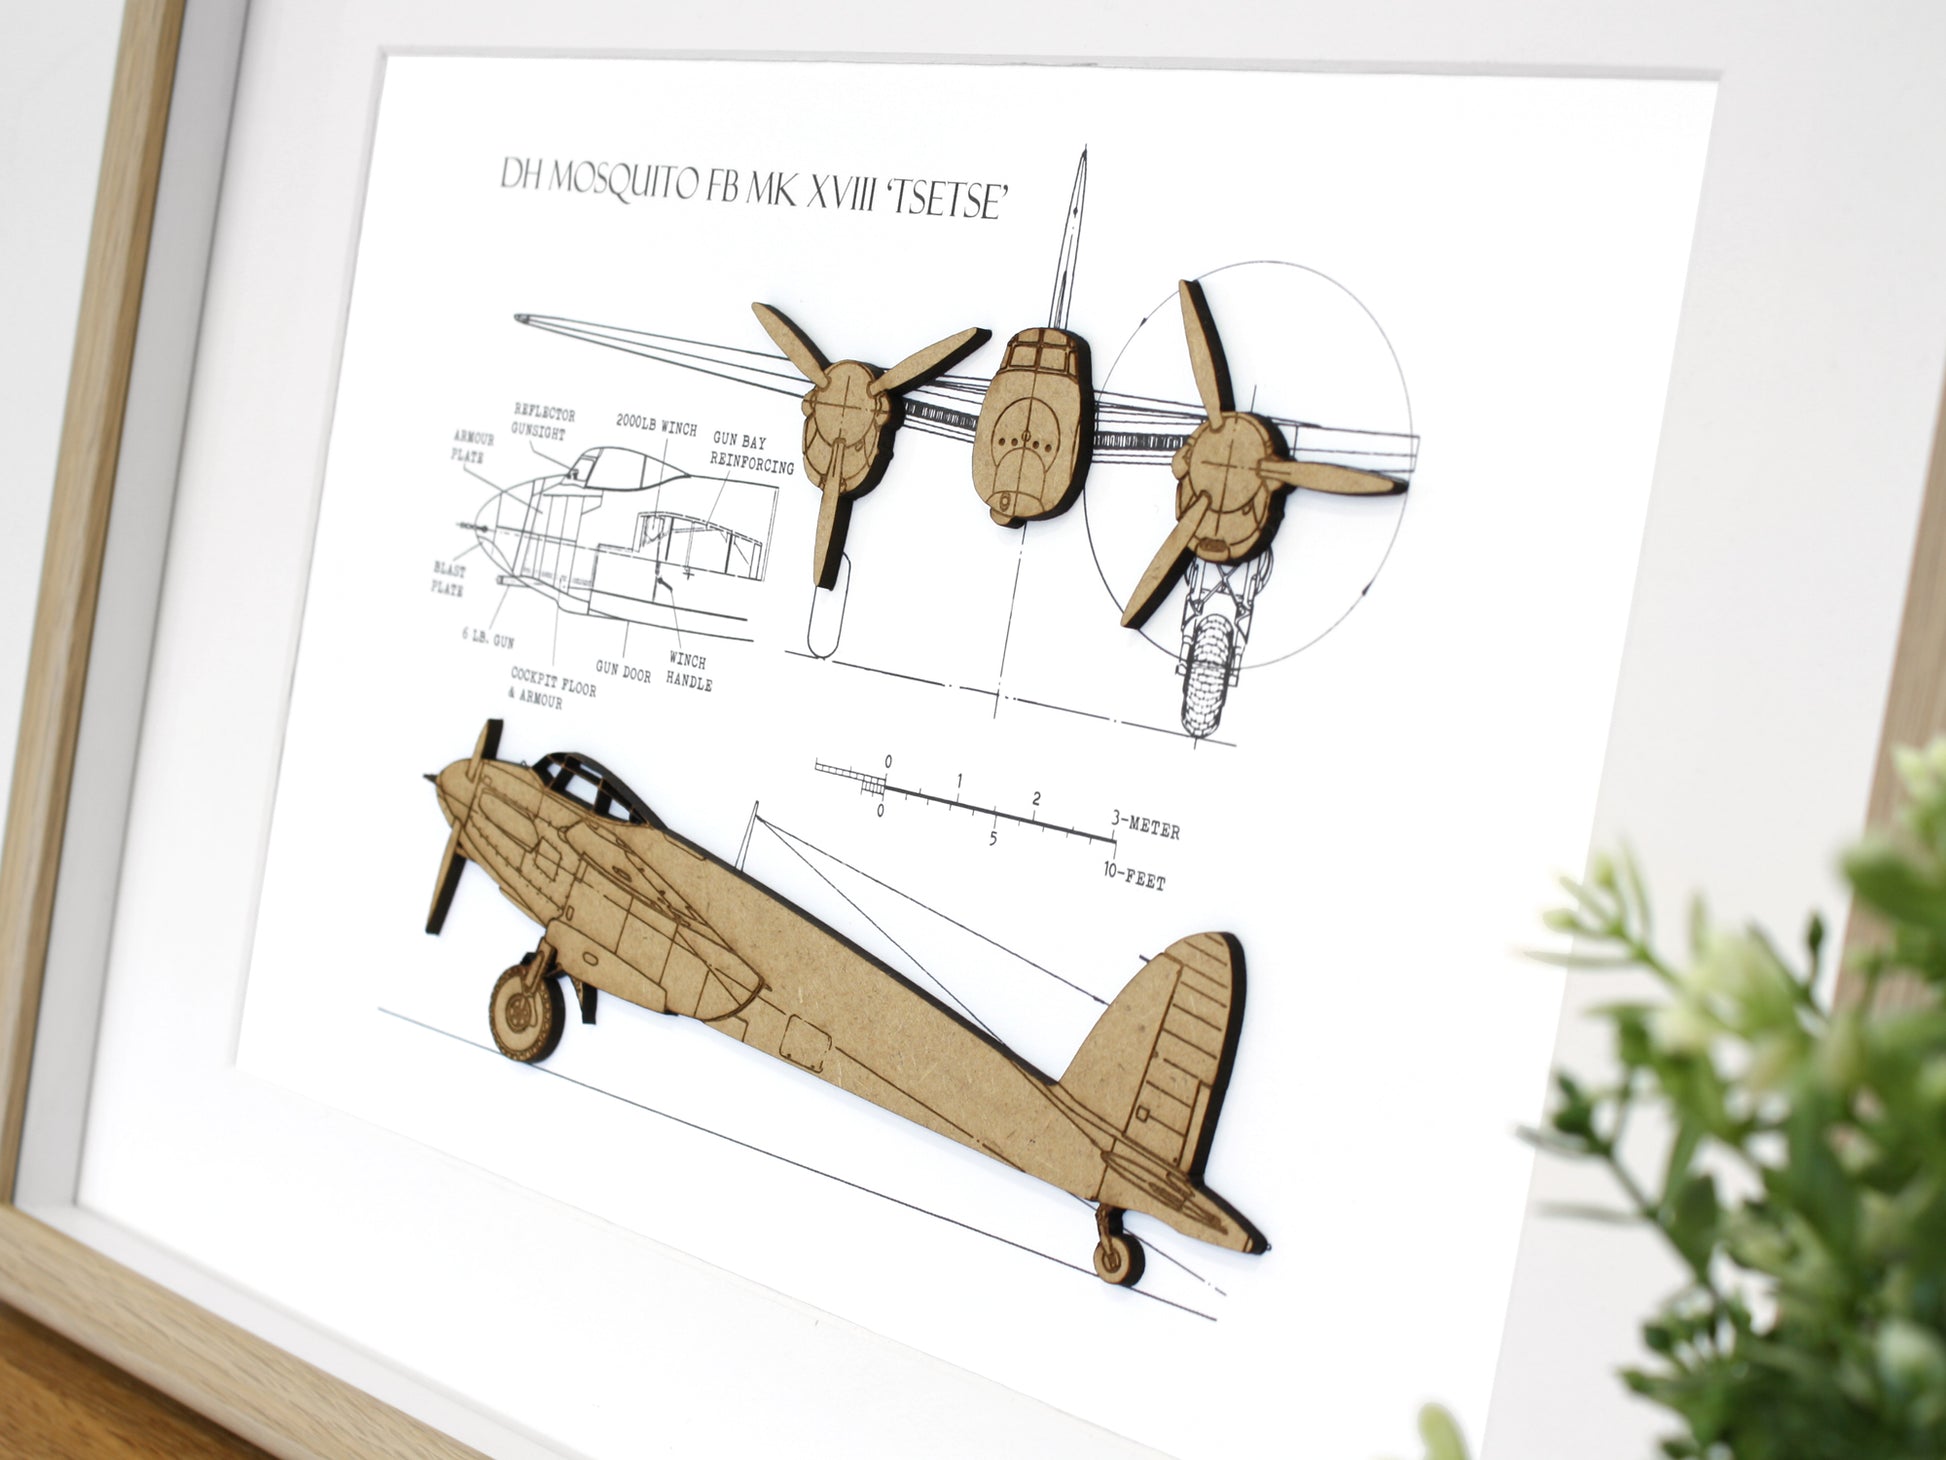 DH mosquito blueprint, aviation gifts